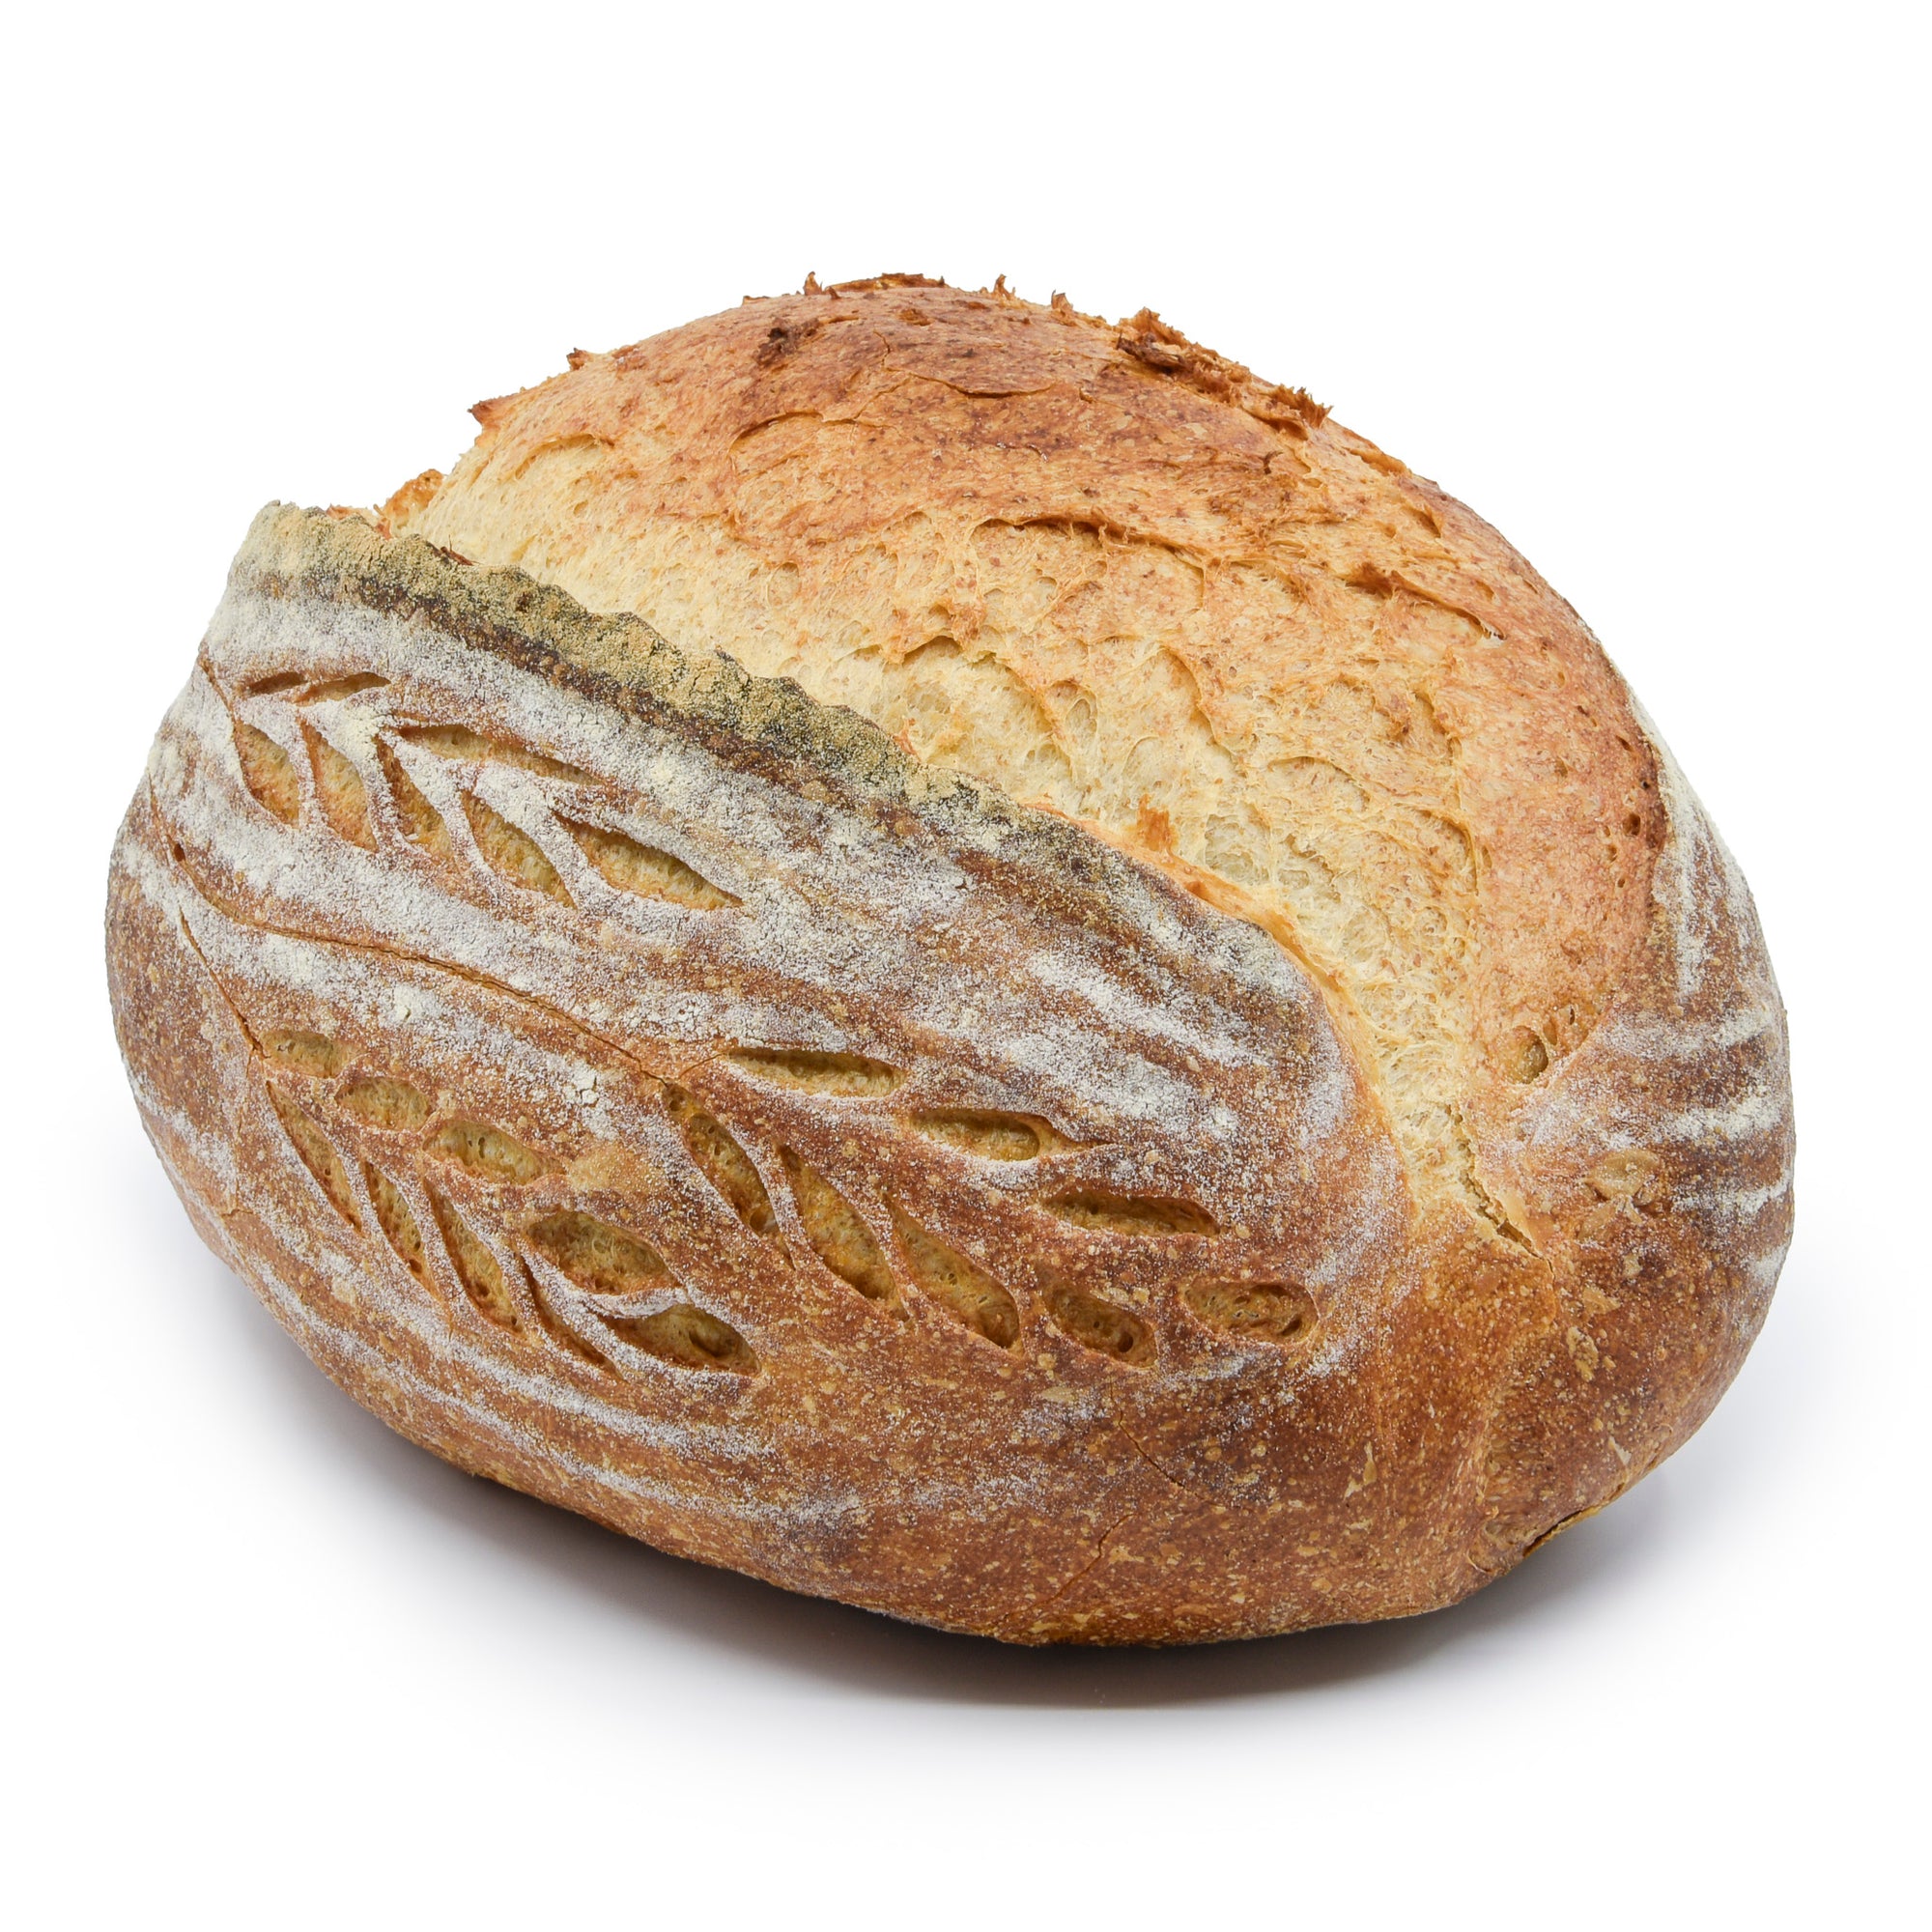 Le fournil bakery pain de campagne bread loaf